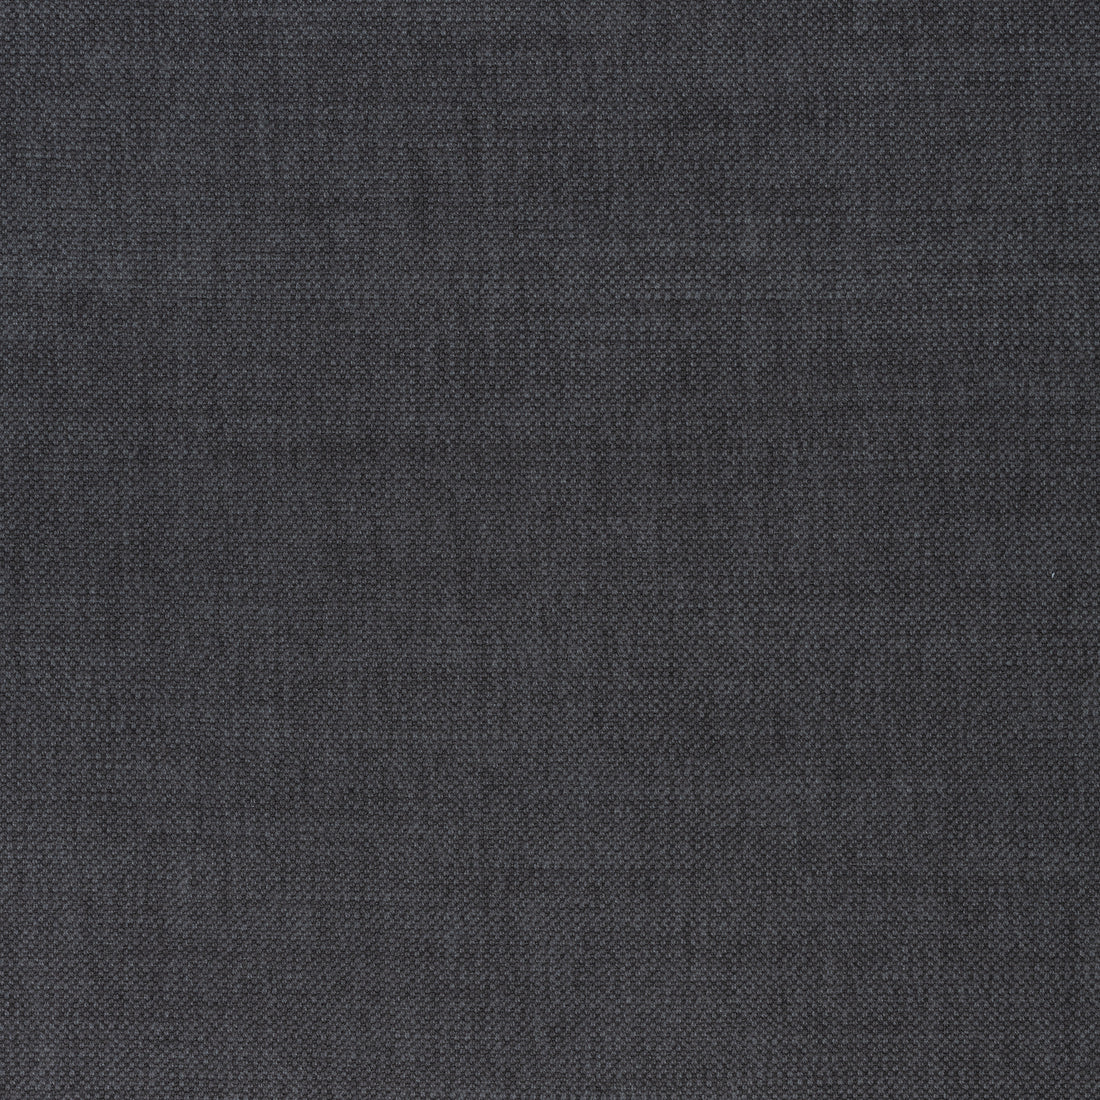 Prisma fabric in graphite color - pattern number W70115 - by Thibaut in the Woven Resource Vol 12 Prisma Fabrics collection